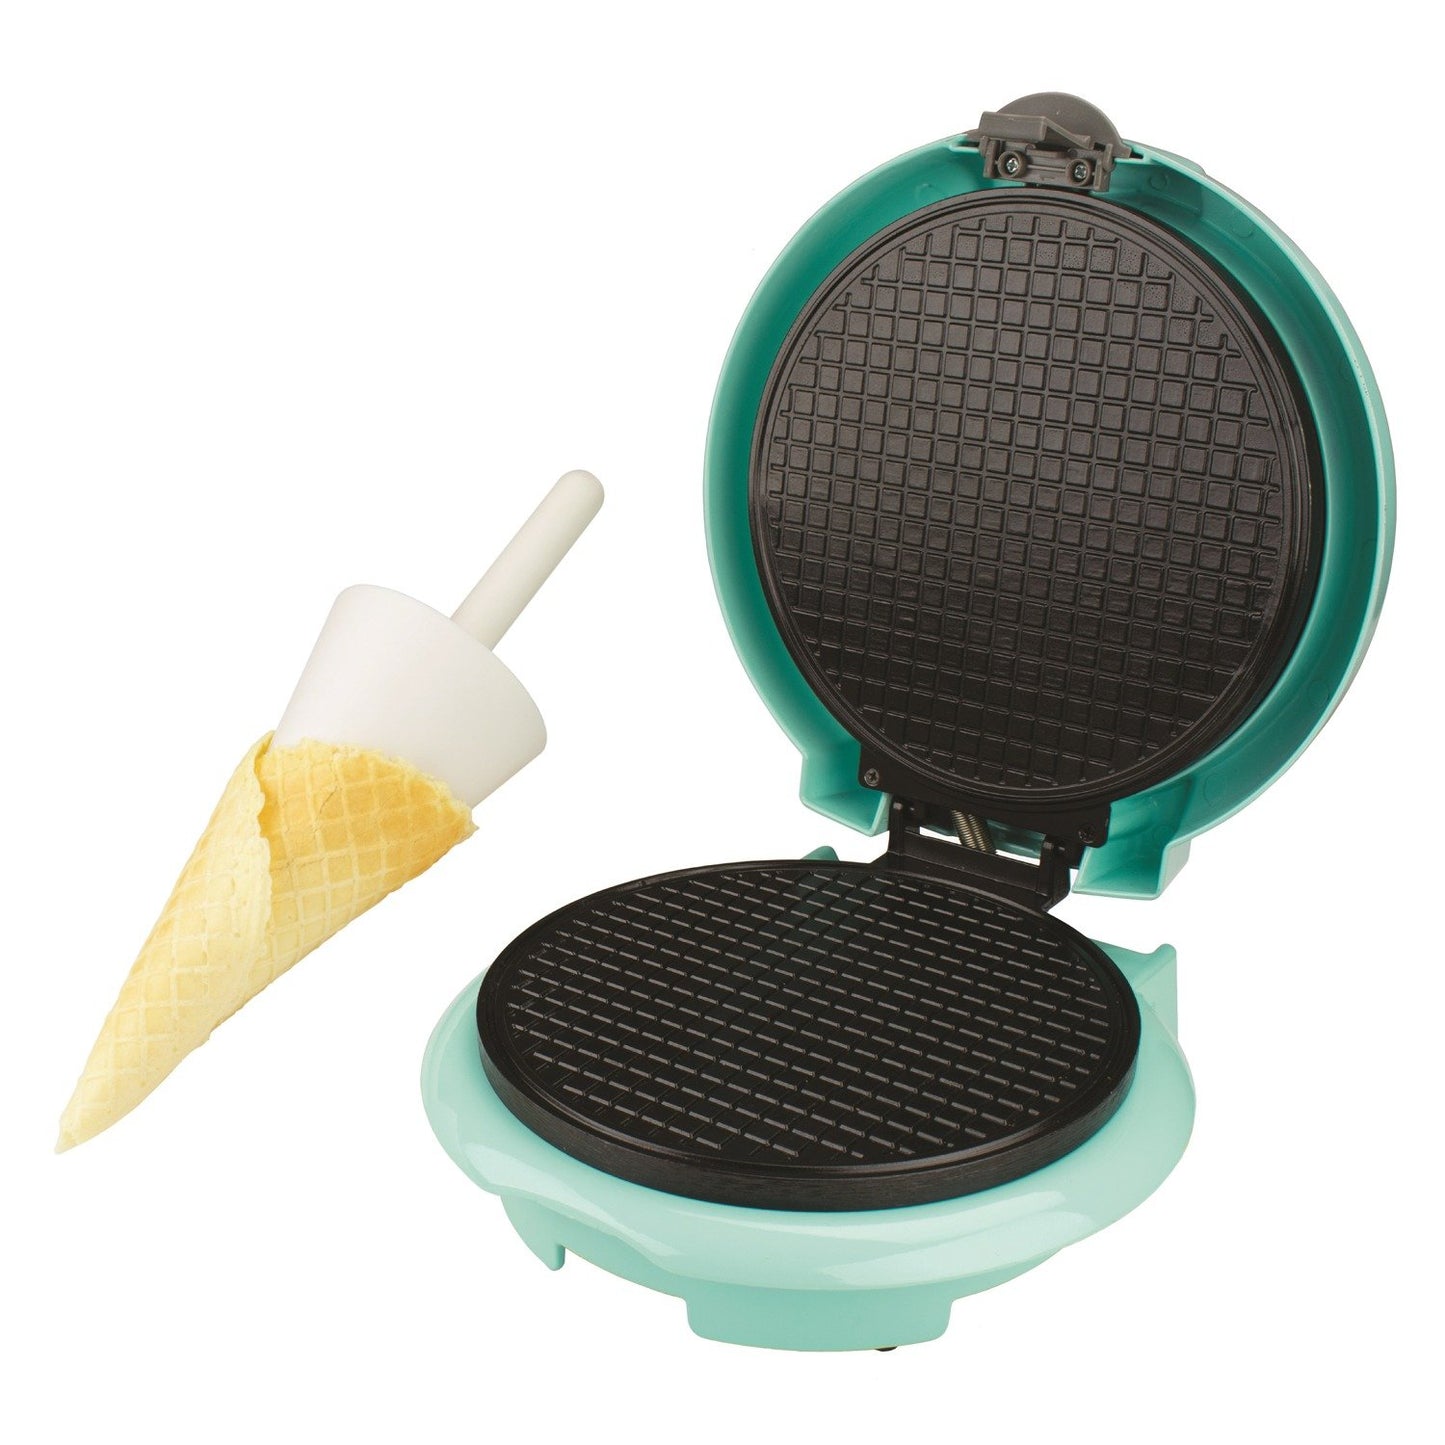 BRENTWOOD TS-1405BL 750W Waffle Cone Maker (Blue)